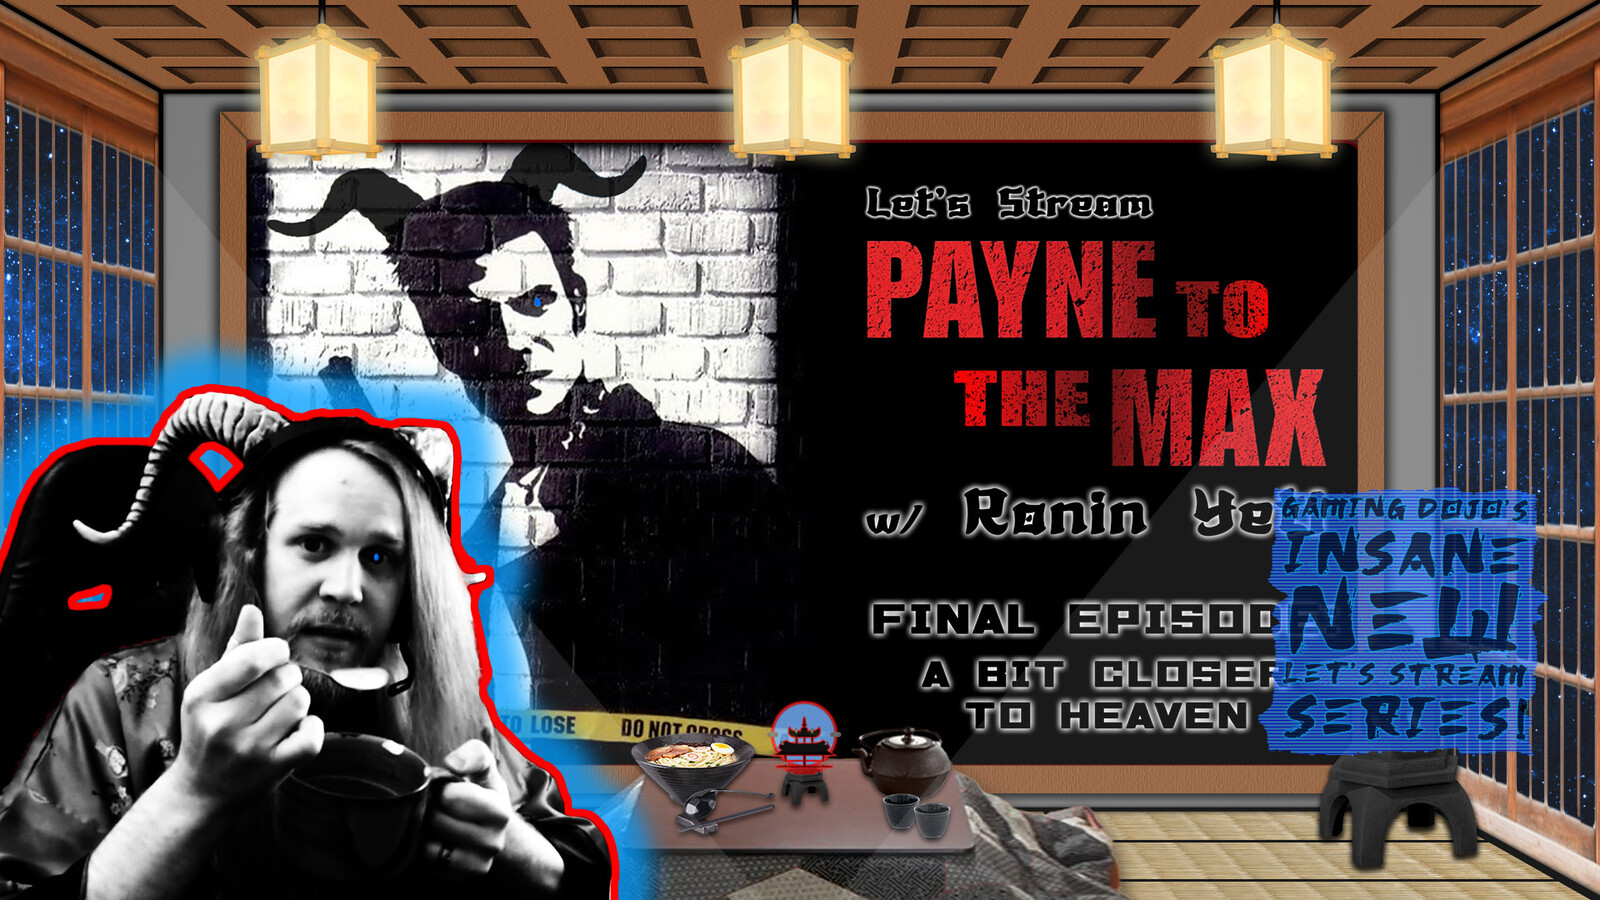 Let's Stream "Payne to the Max" Final Episode Image | Ronin Yeti Twitch Streaming